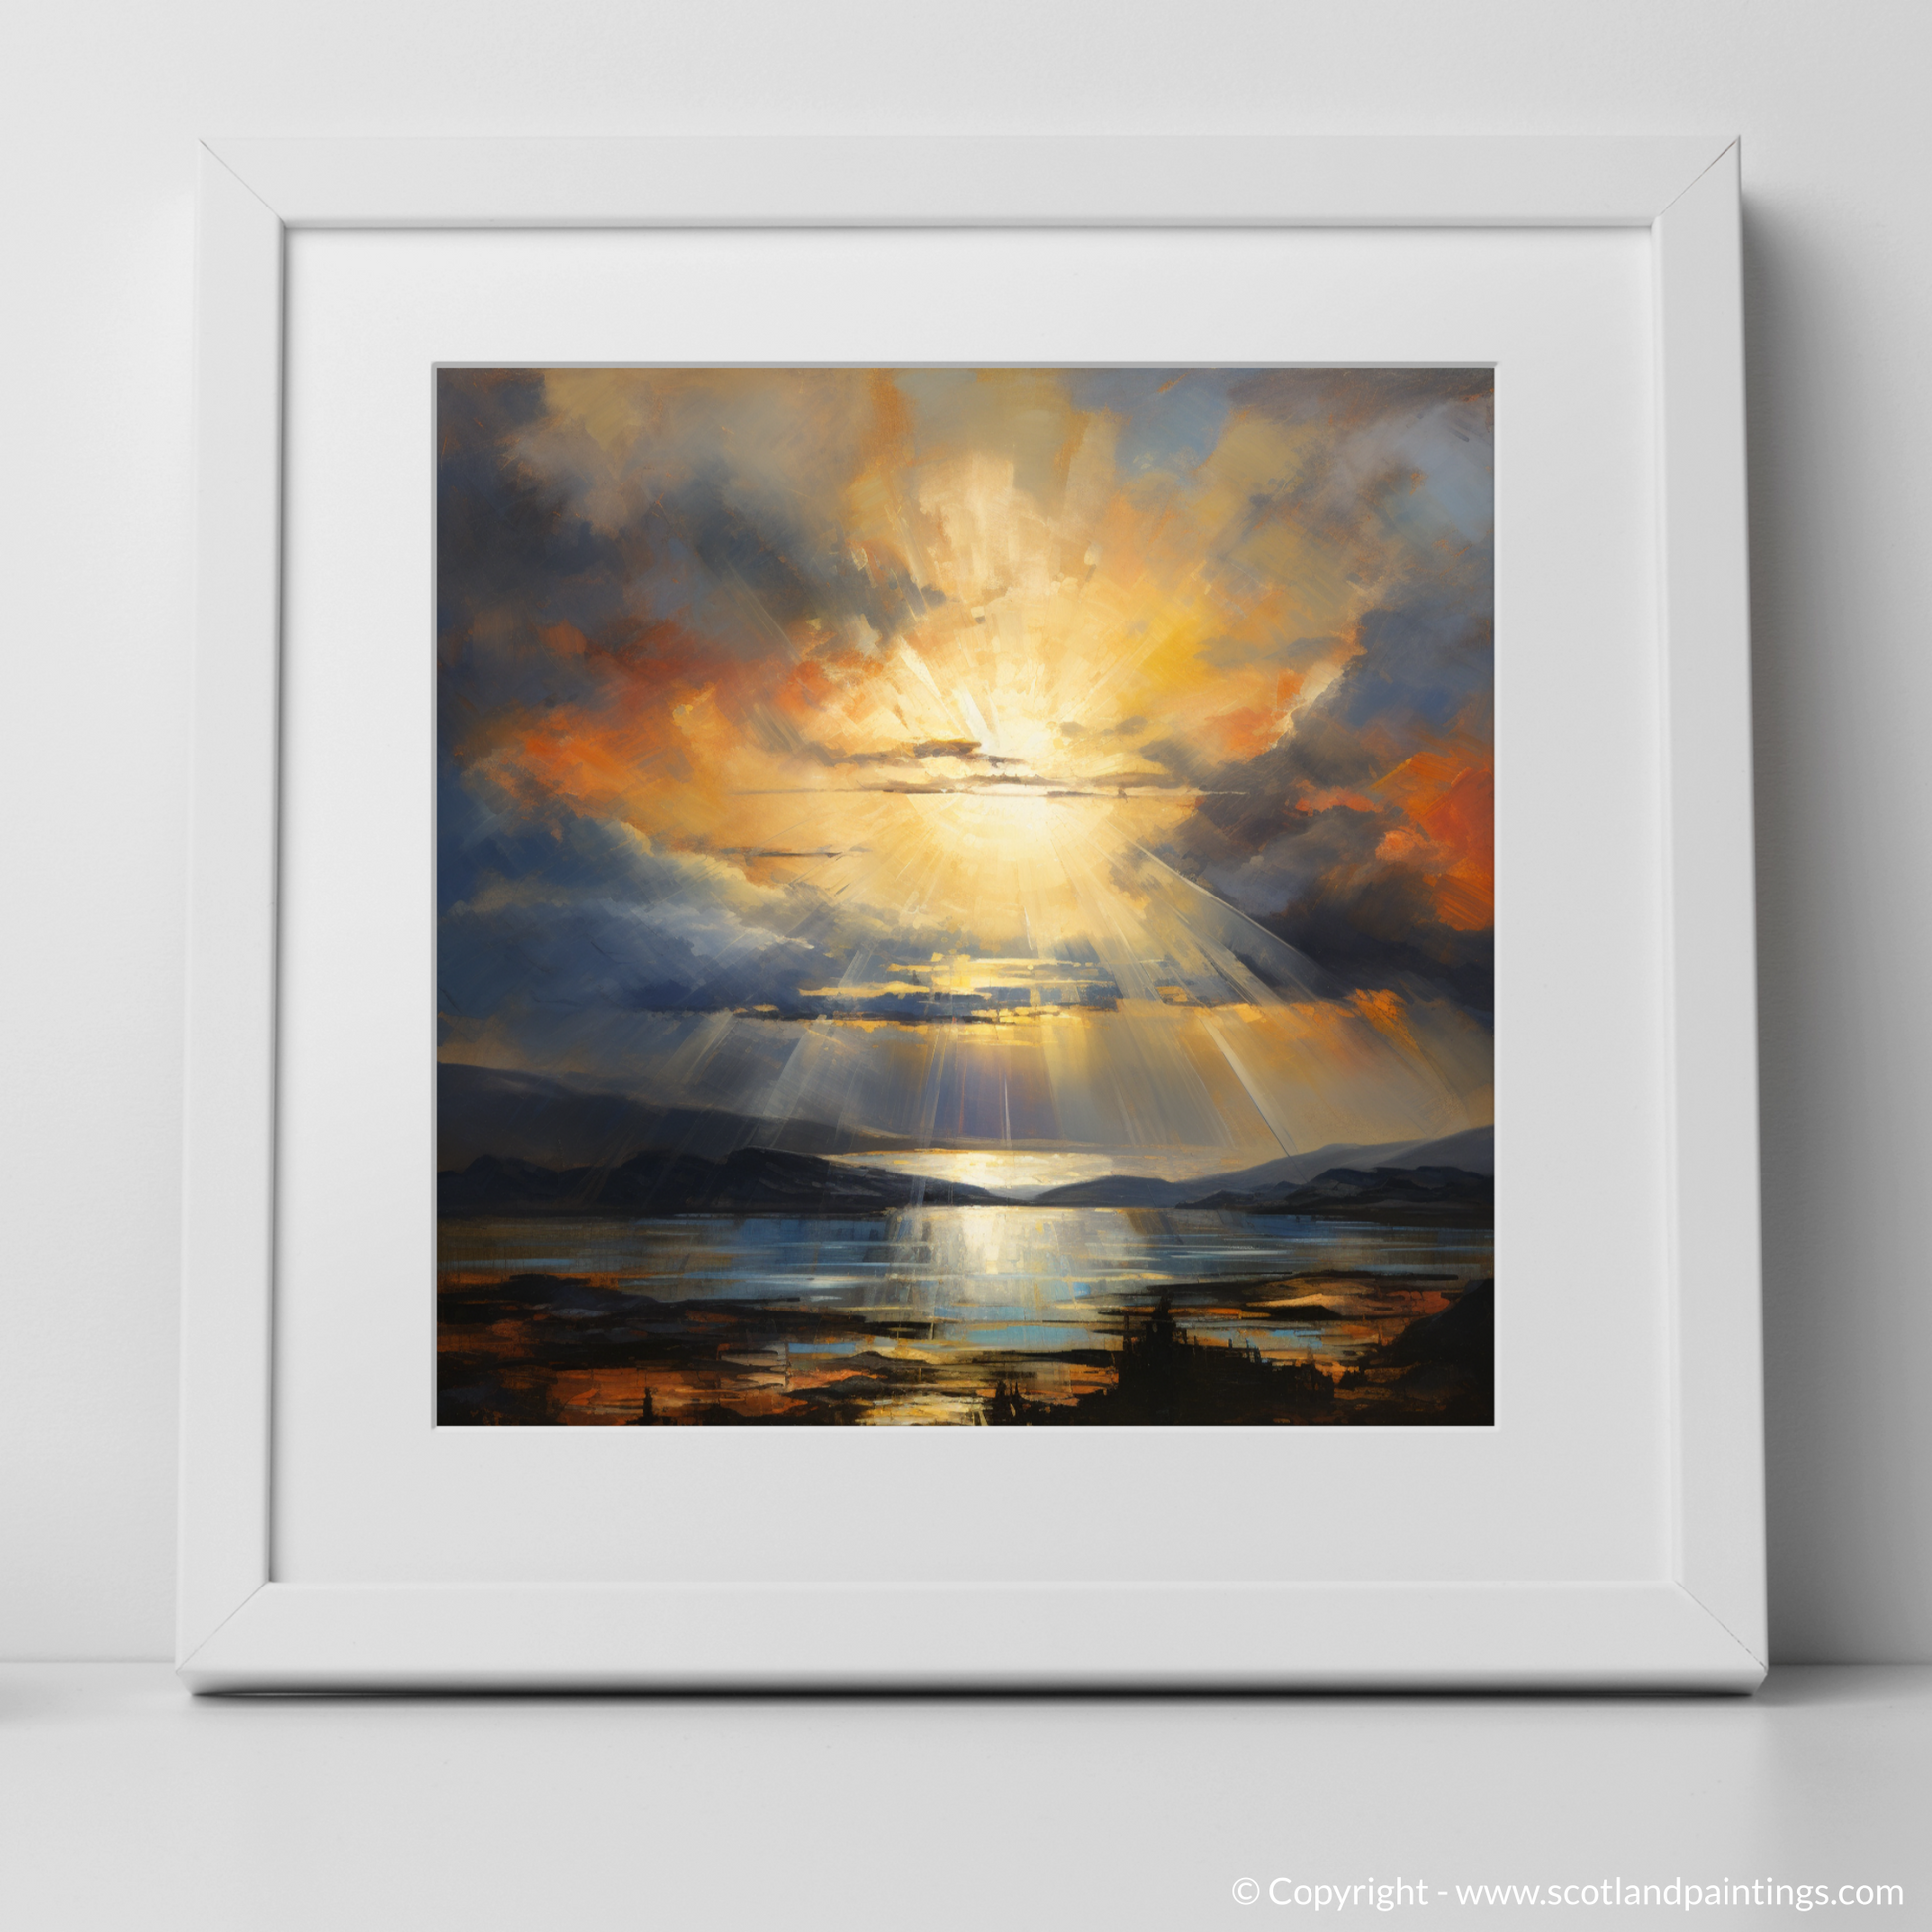 Art Print of Crepuscular rays above Loch Lomond with a white frame